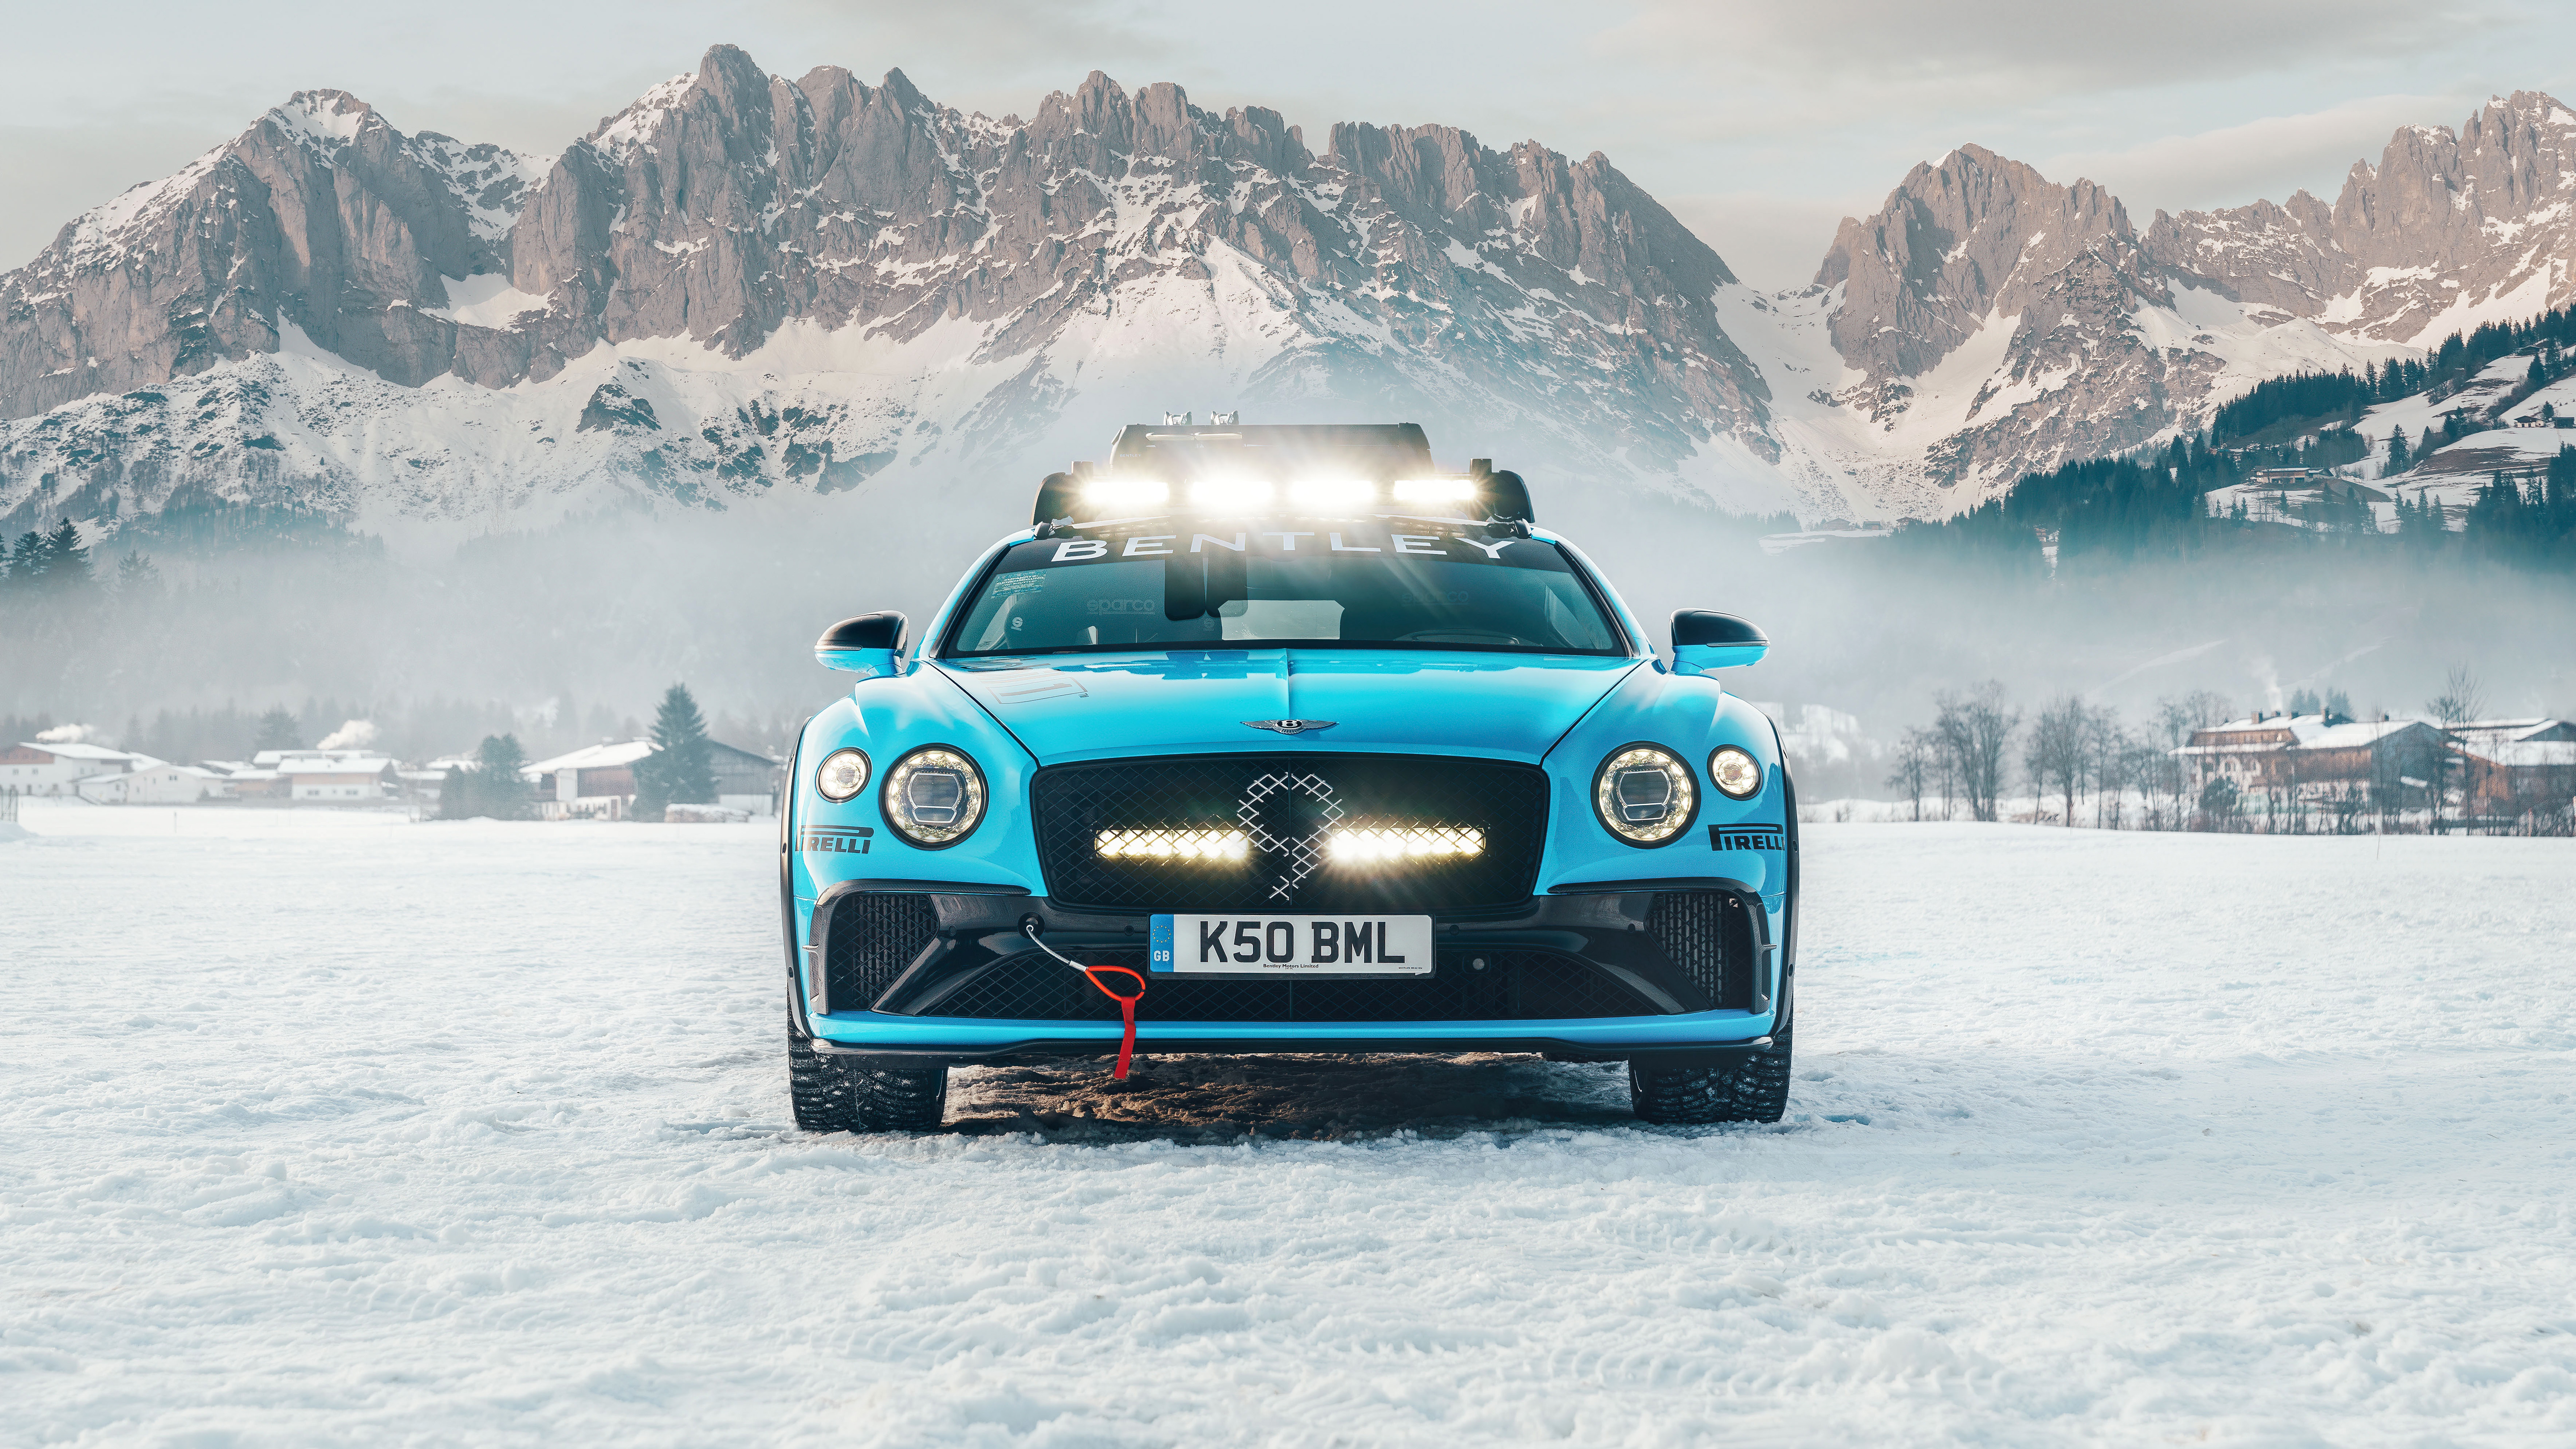 Wallpapers snow mountains Bentley Continental GT on the desktop